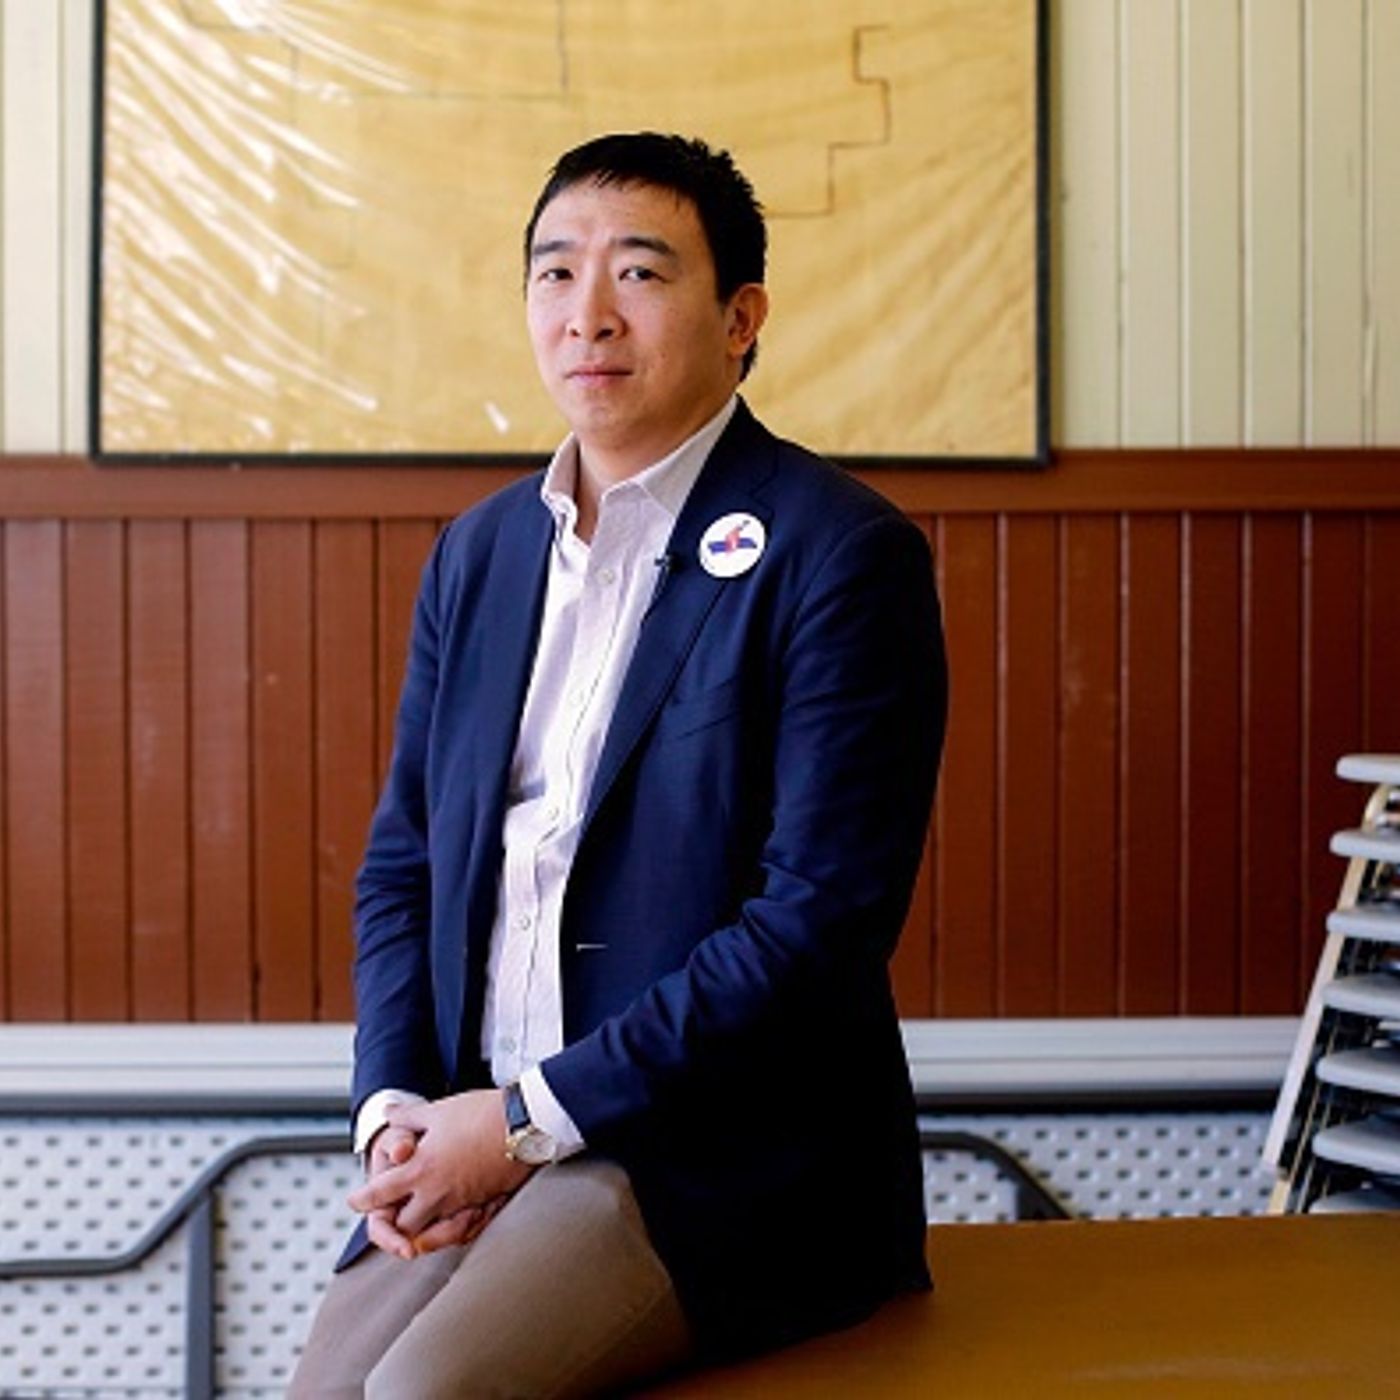 Does Andrew Yang stand a chance in 2020?